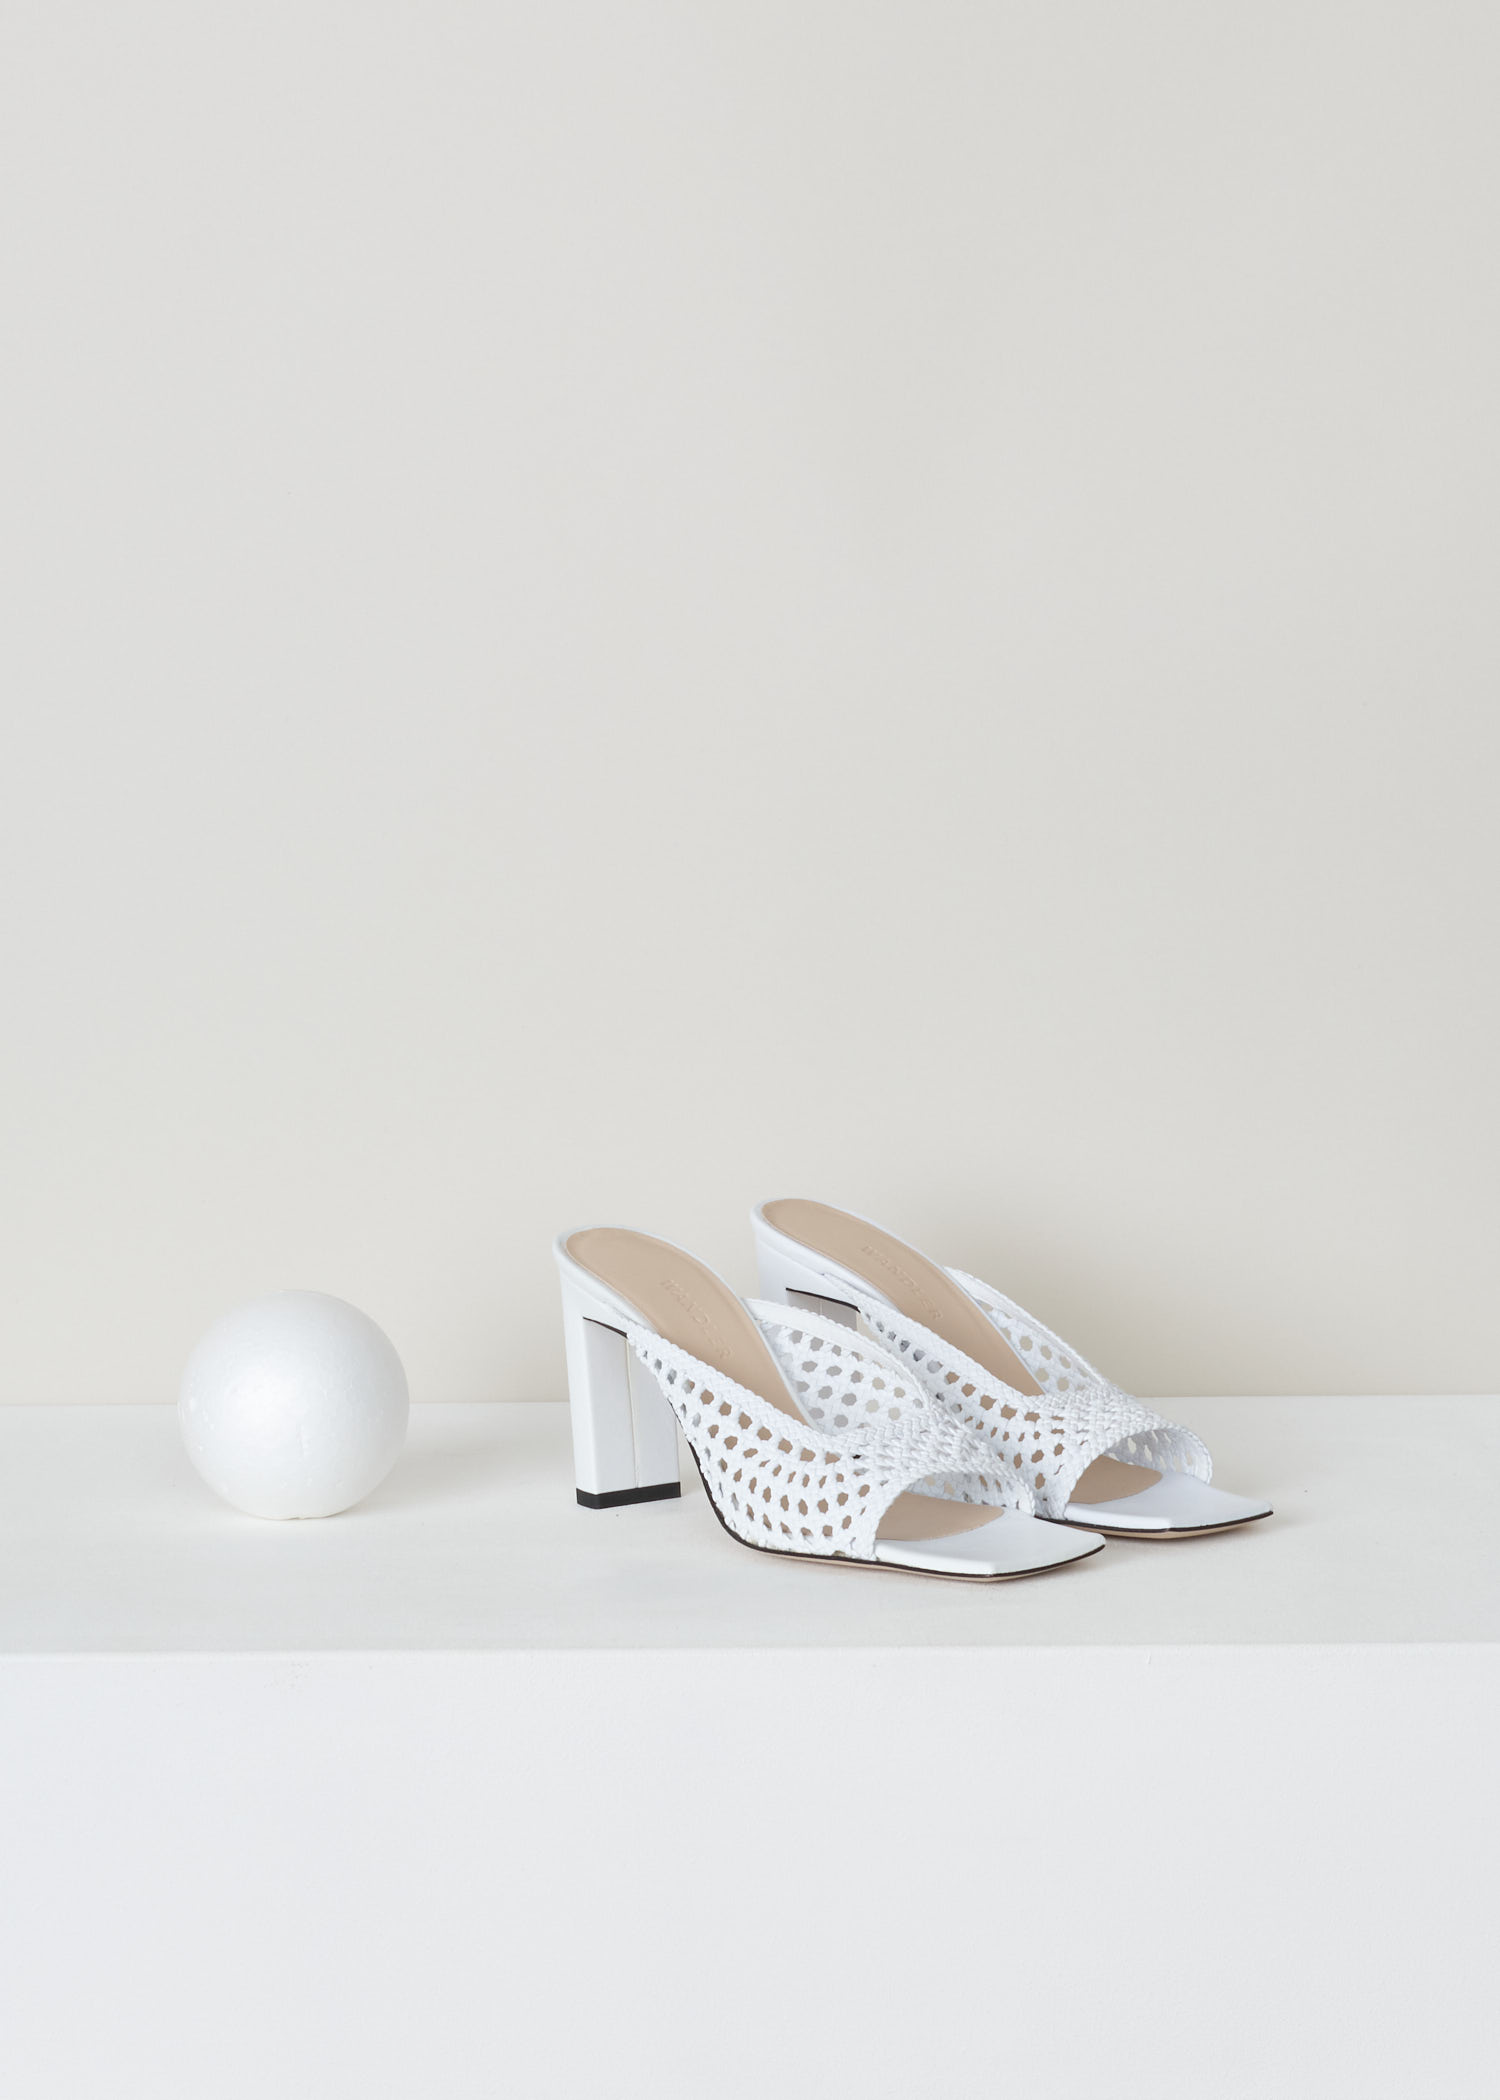 Wandler, White woven leather sandals, isa_sandal_mesh_white, white, front, White Wandler sandals made from together woven strands of lambskin, turned into this beautiful mesh. This model comes with square-cut toes, and leather soles.

heel height: 9 cm / 3.5 inch  